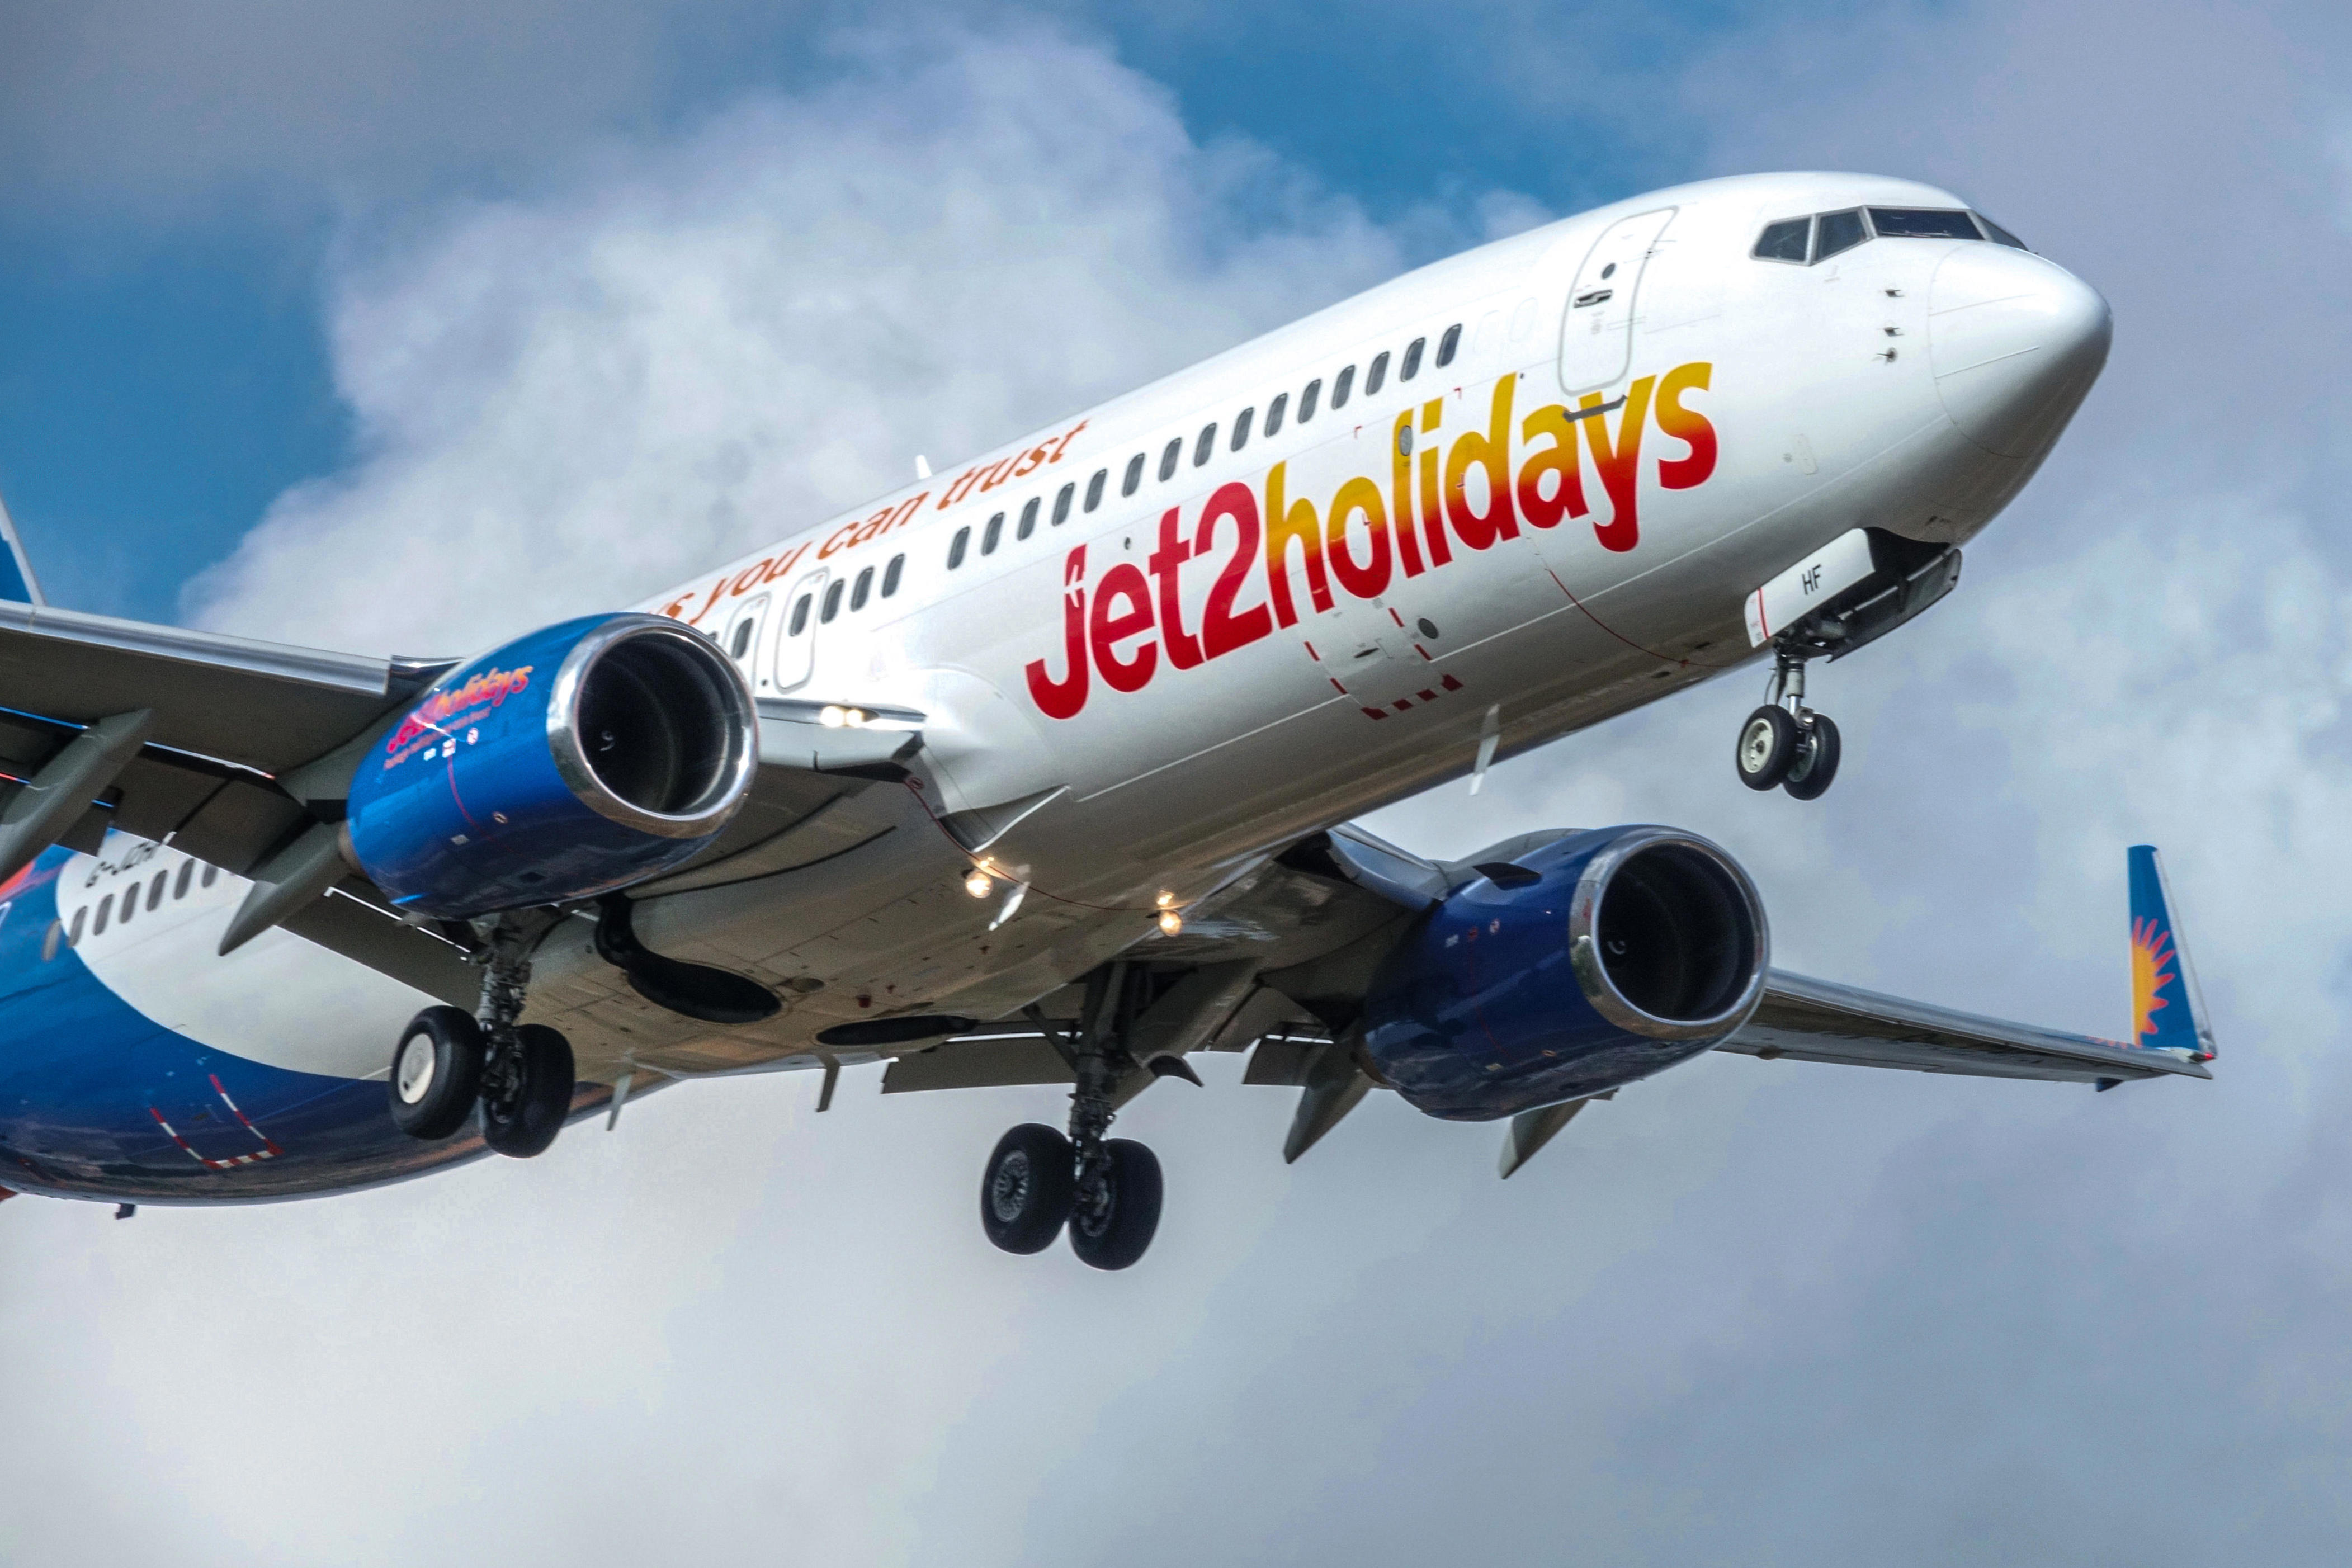 package holidays take off for jet2 as consumers keen to escape ‘rainy island’